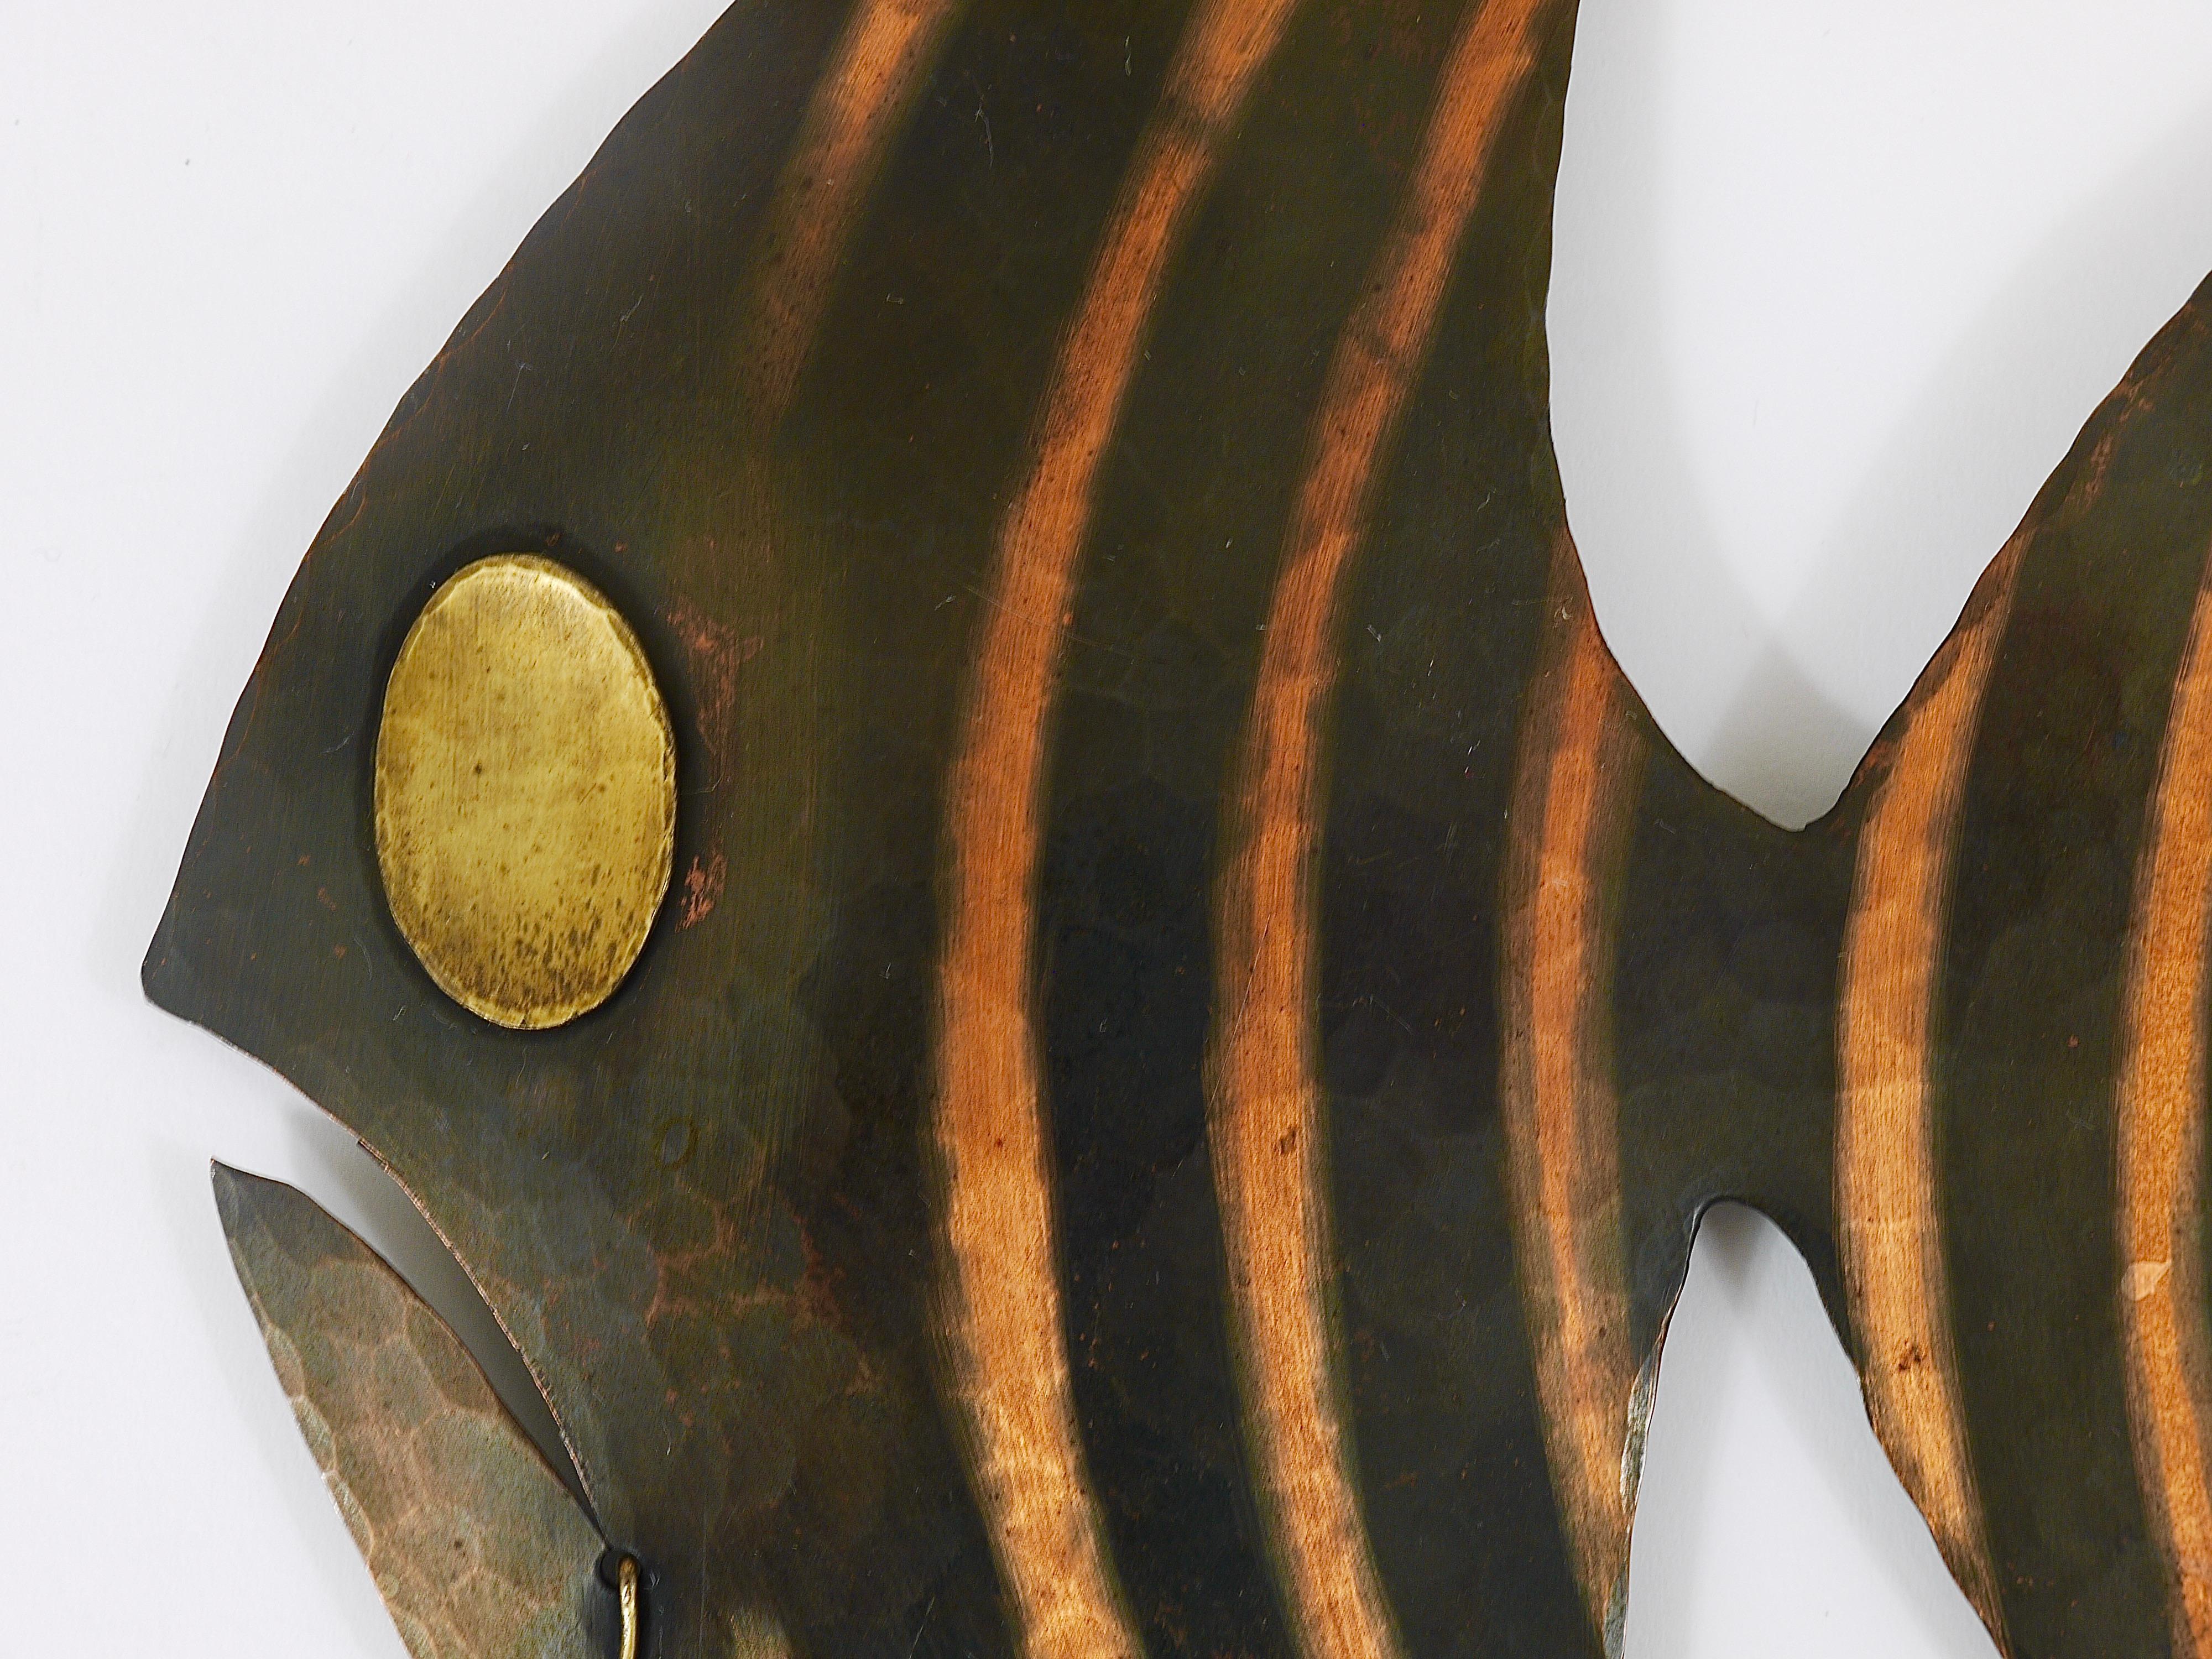 Brass Midcentury Hammered Angel Fish Wall Plaque Sculpture, Copper, Austria, 1950s For Sale